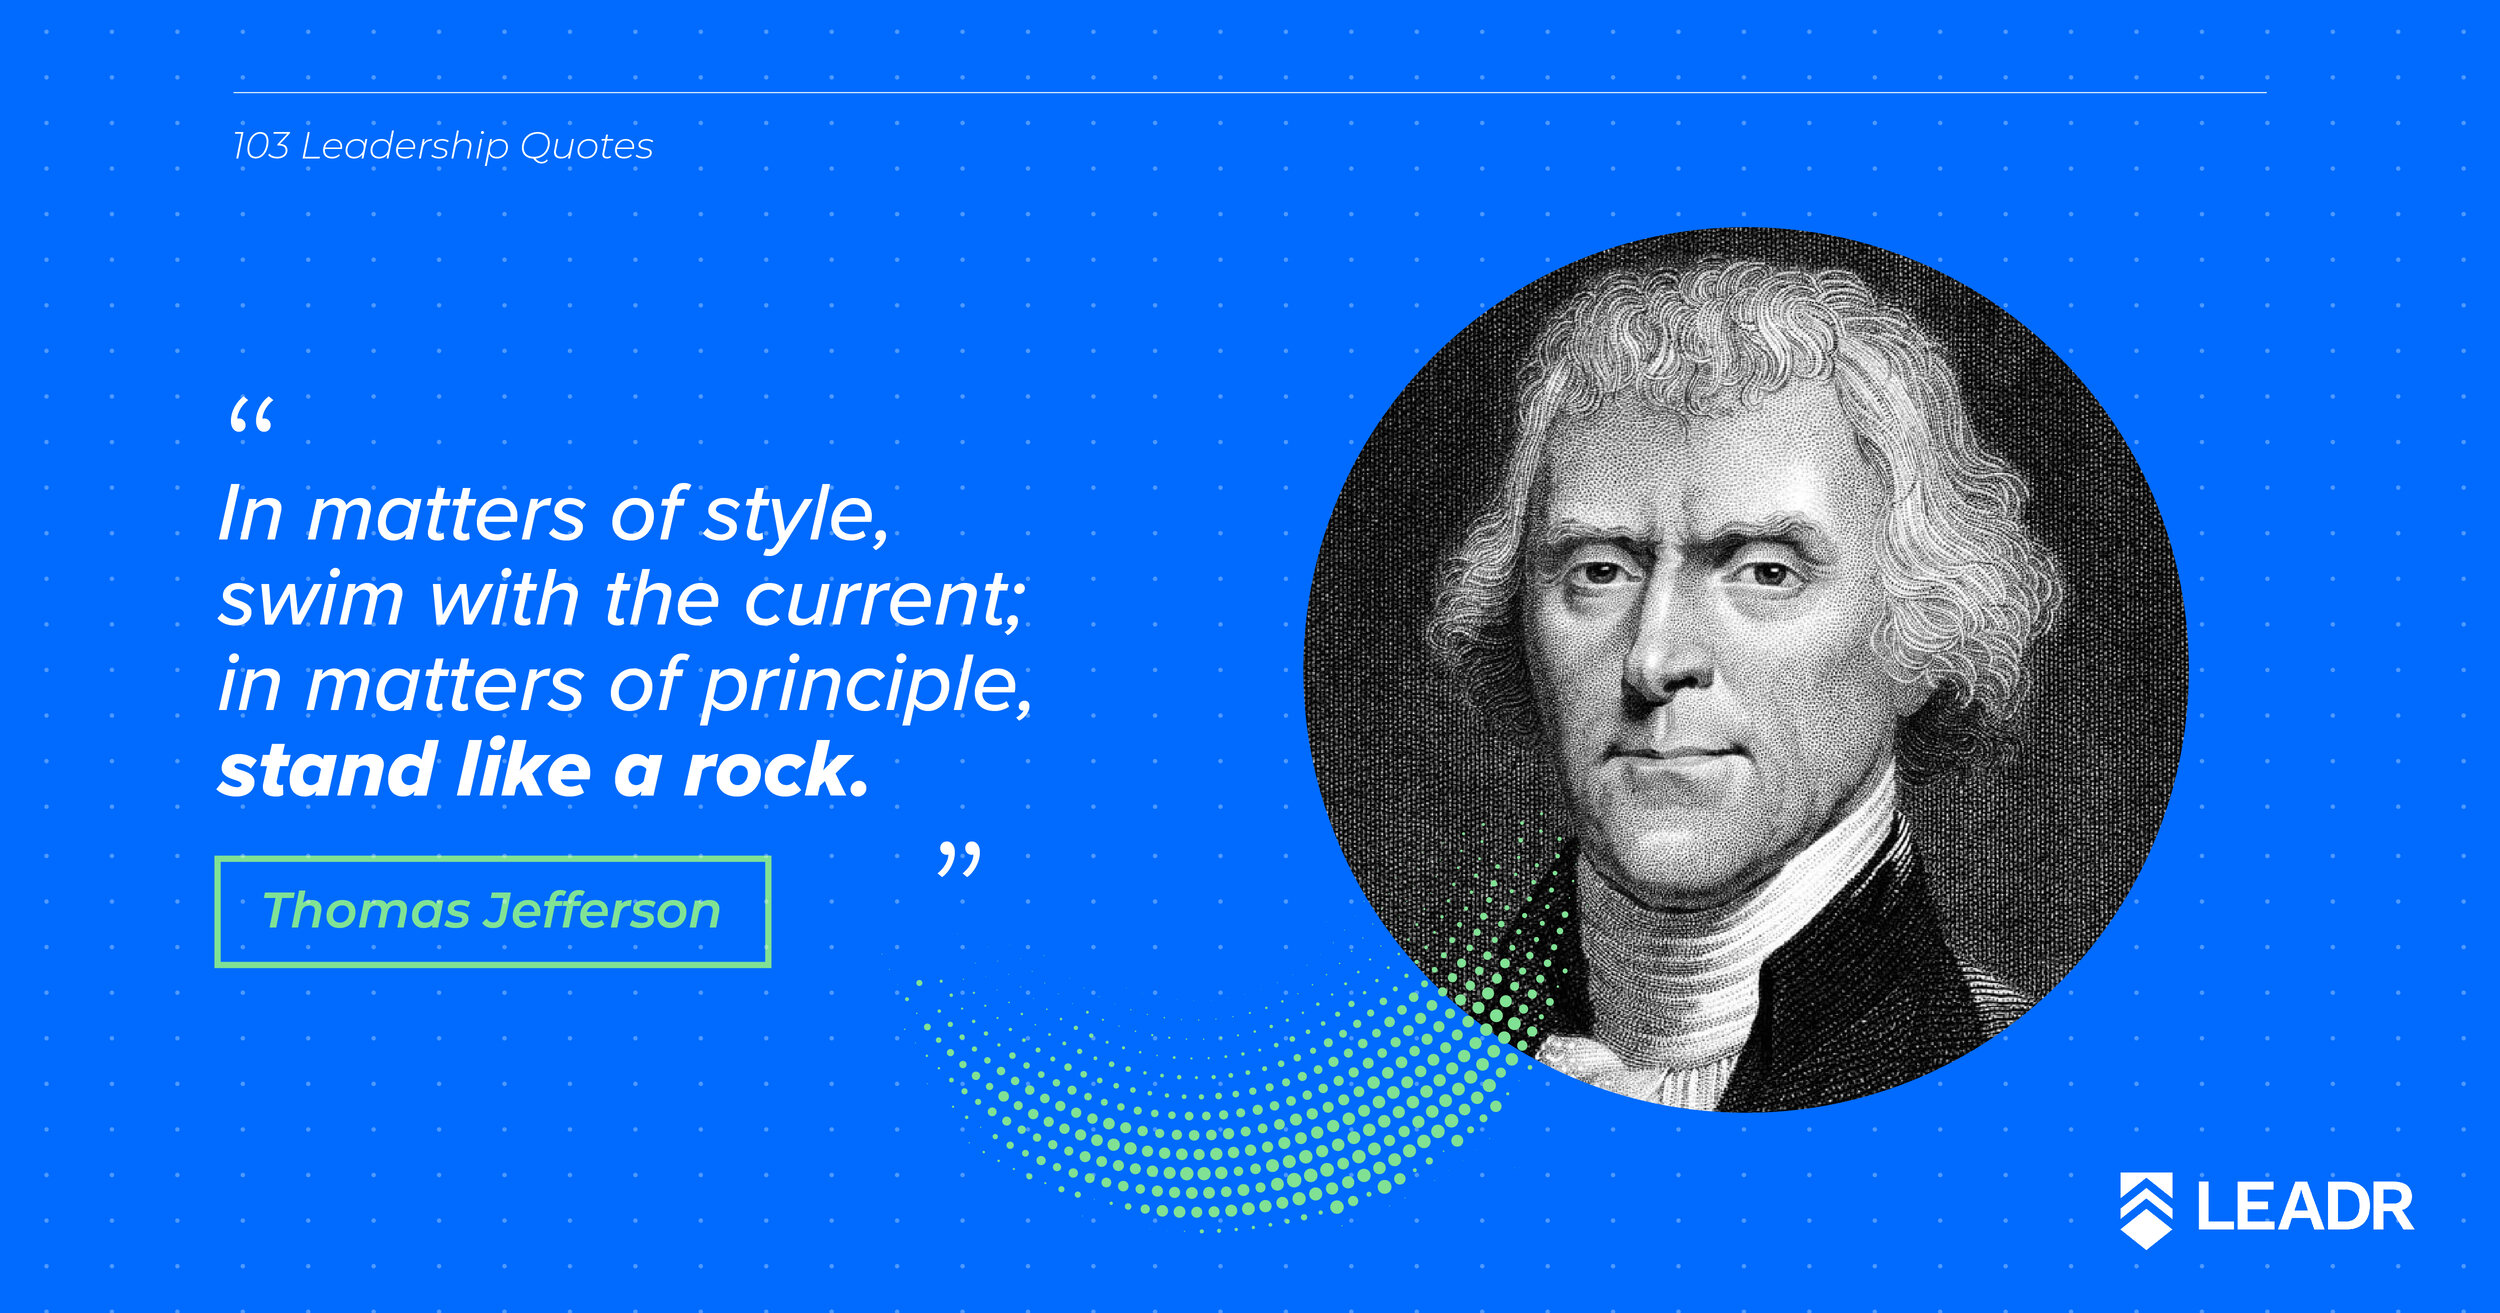 Royalty free downloadable leadership quotes - Thomas Jefferson